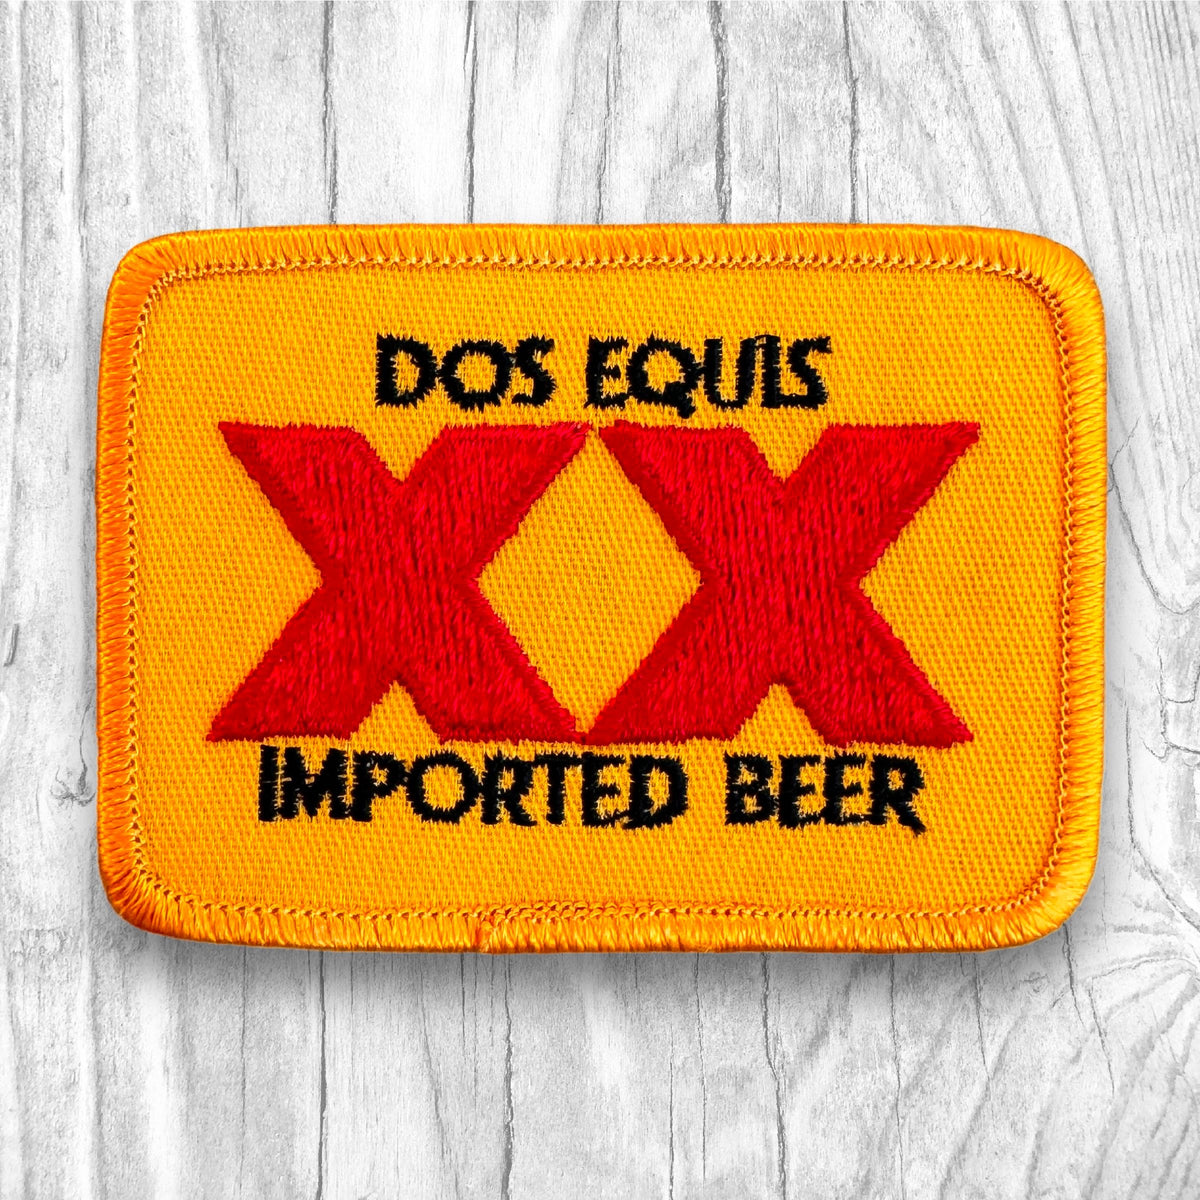 DOS EQUIS IMPORTED BEER. Authentic Vintage Patch – Megadeluxe